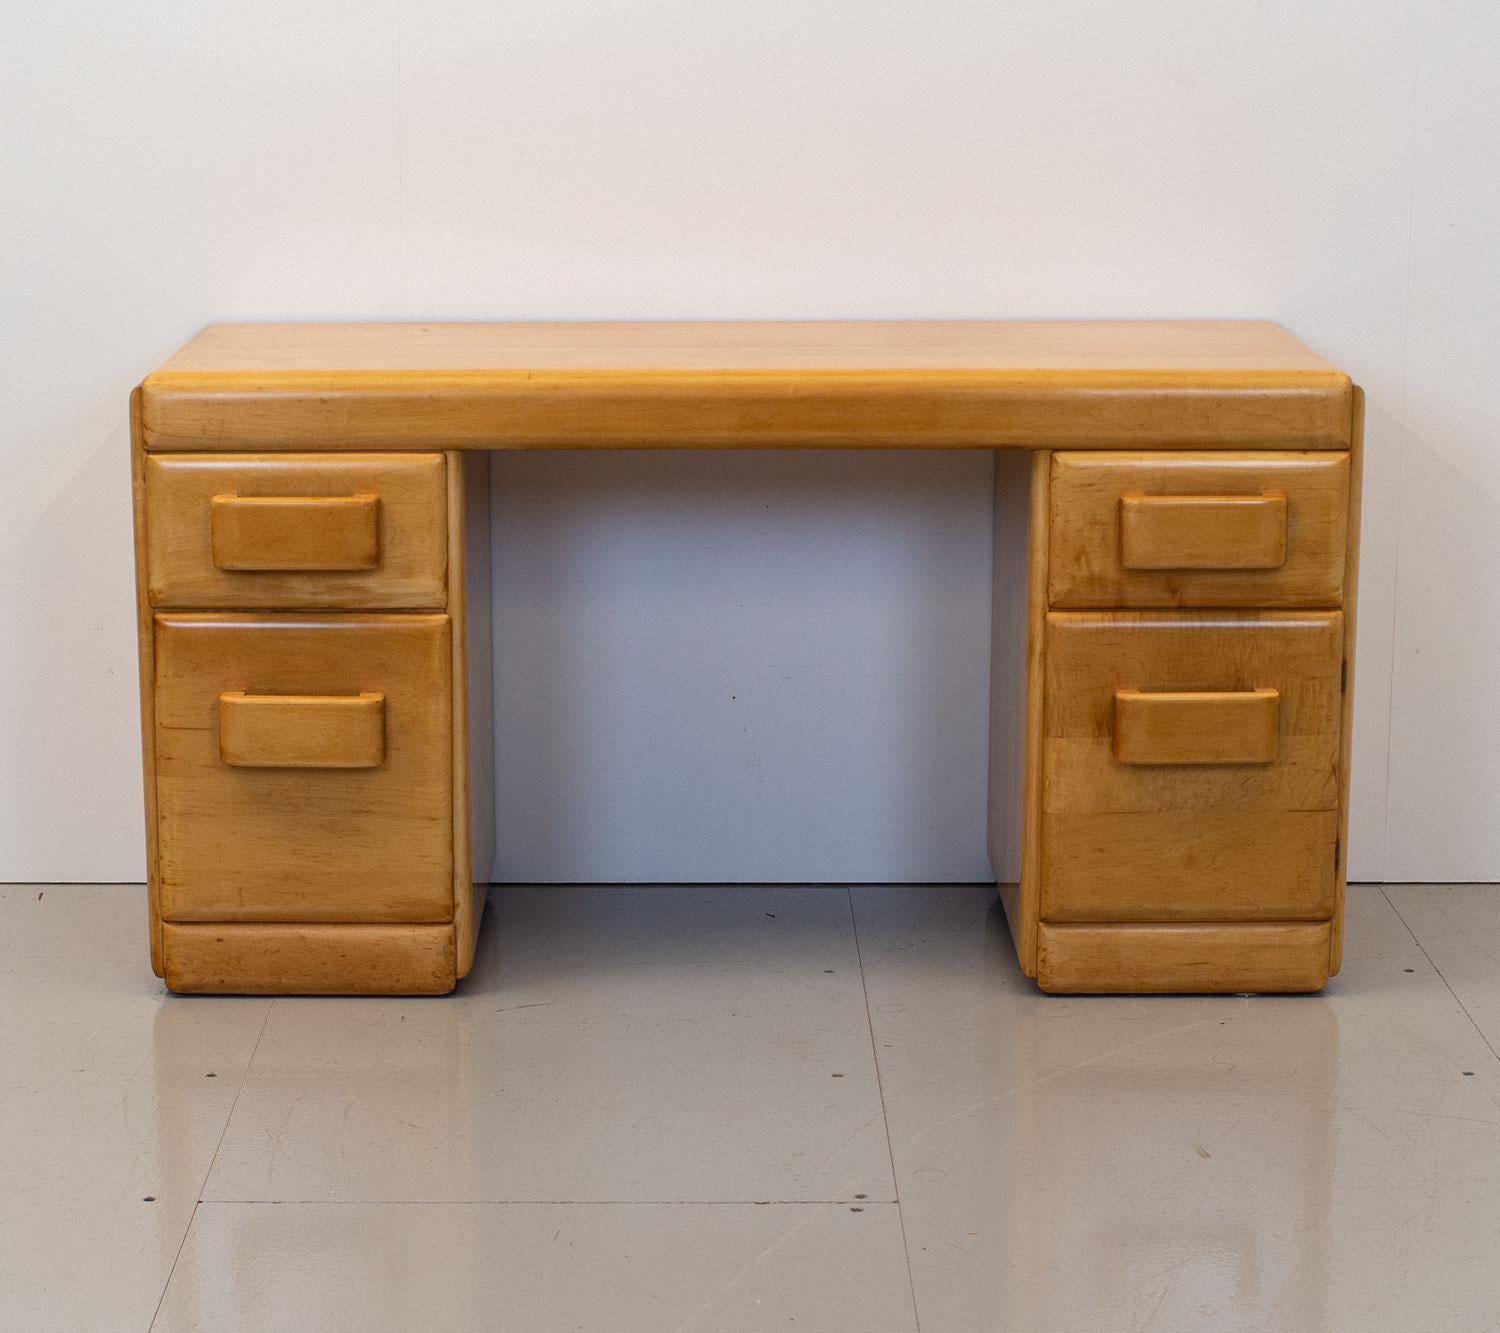 American Art Deco – Modernist solid maple dressing table by Russel Wright for conant ball. It has five drawers two of which are hidden behind a cupboard door and a matching maple stool reupholstered in a 100% blue wool fabric by Abraham Moon. This